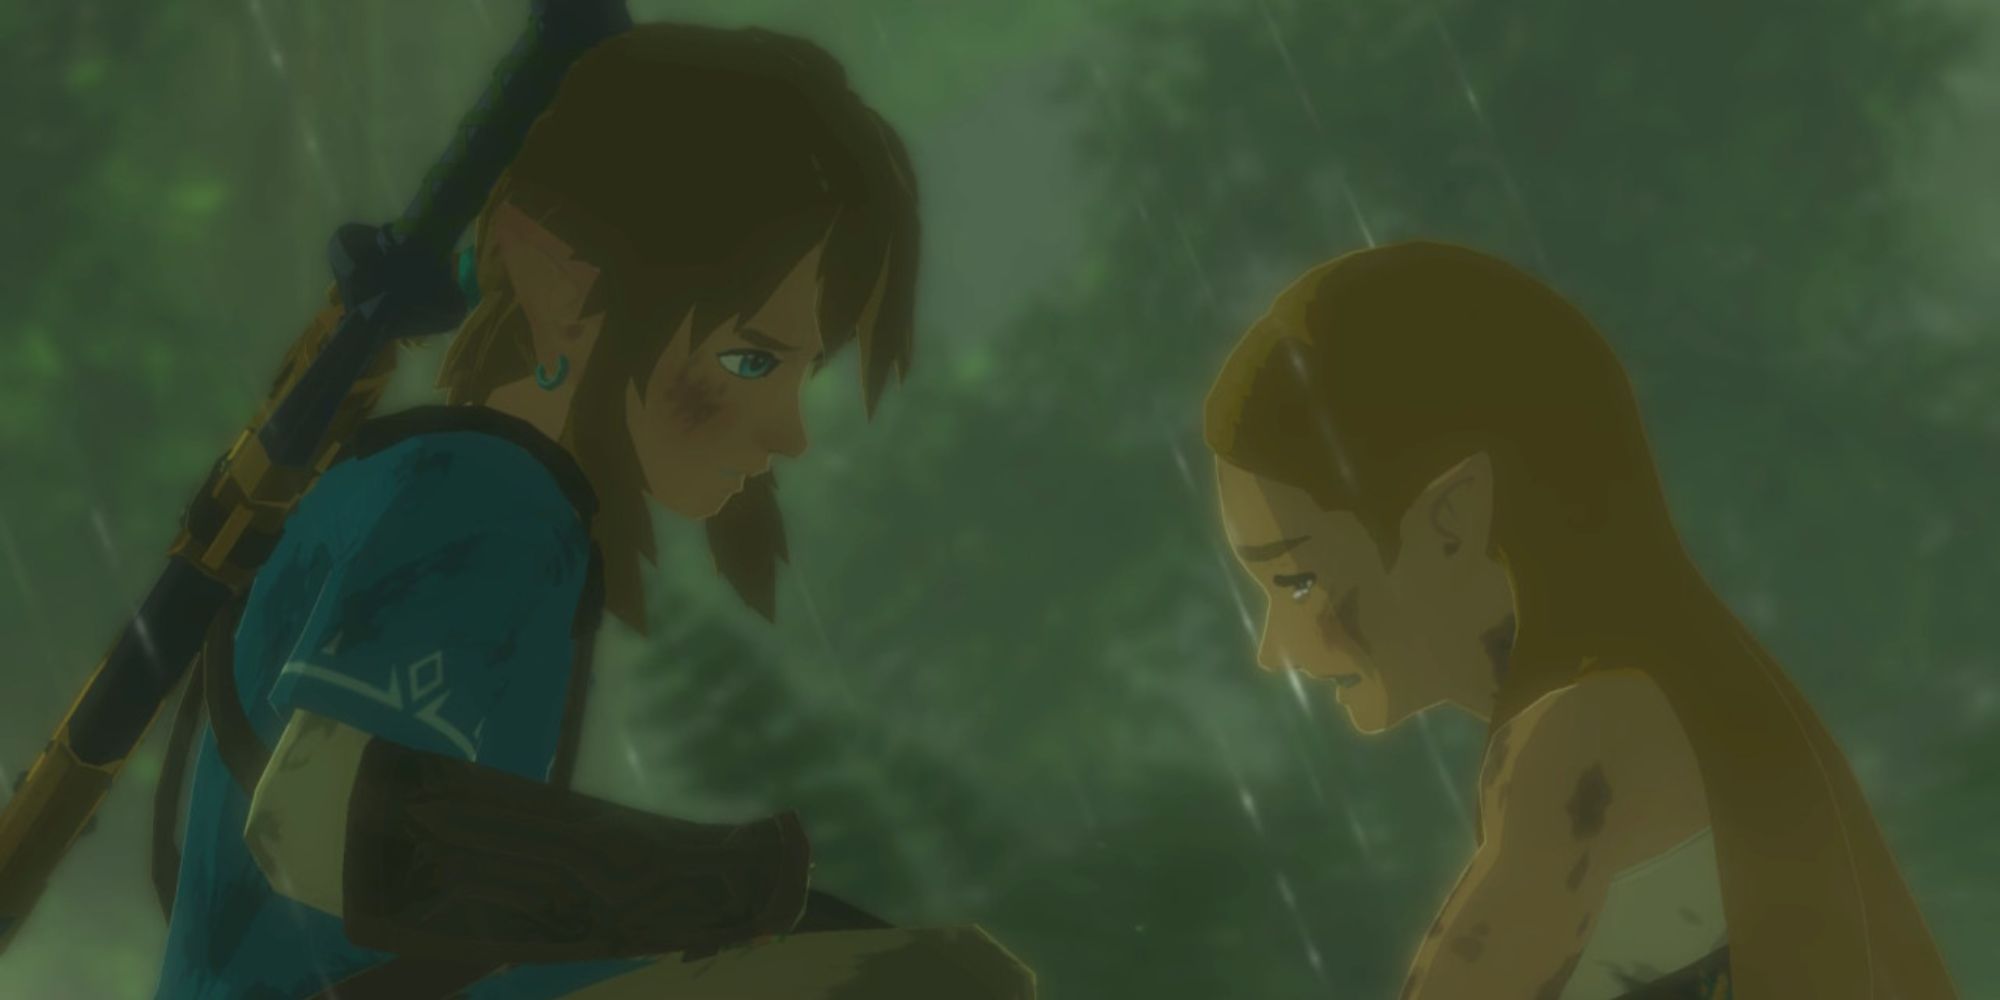 Zelda begins to cry during a rainstorm with Link